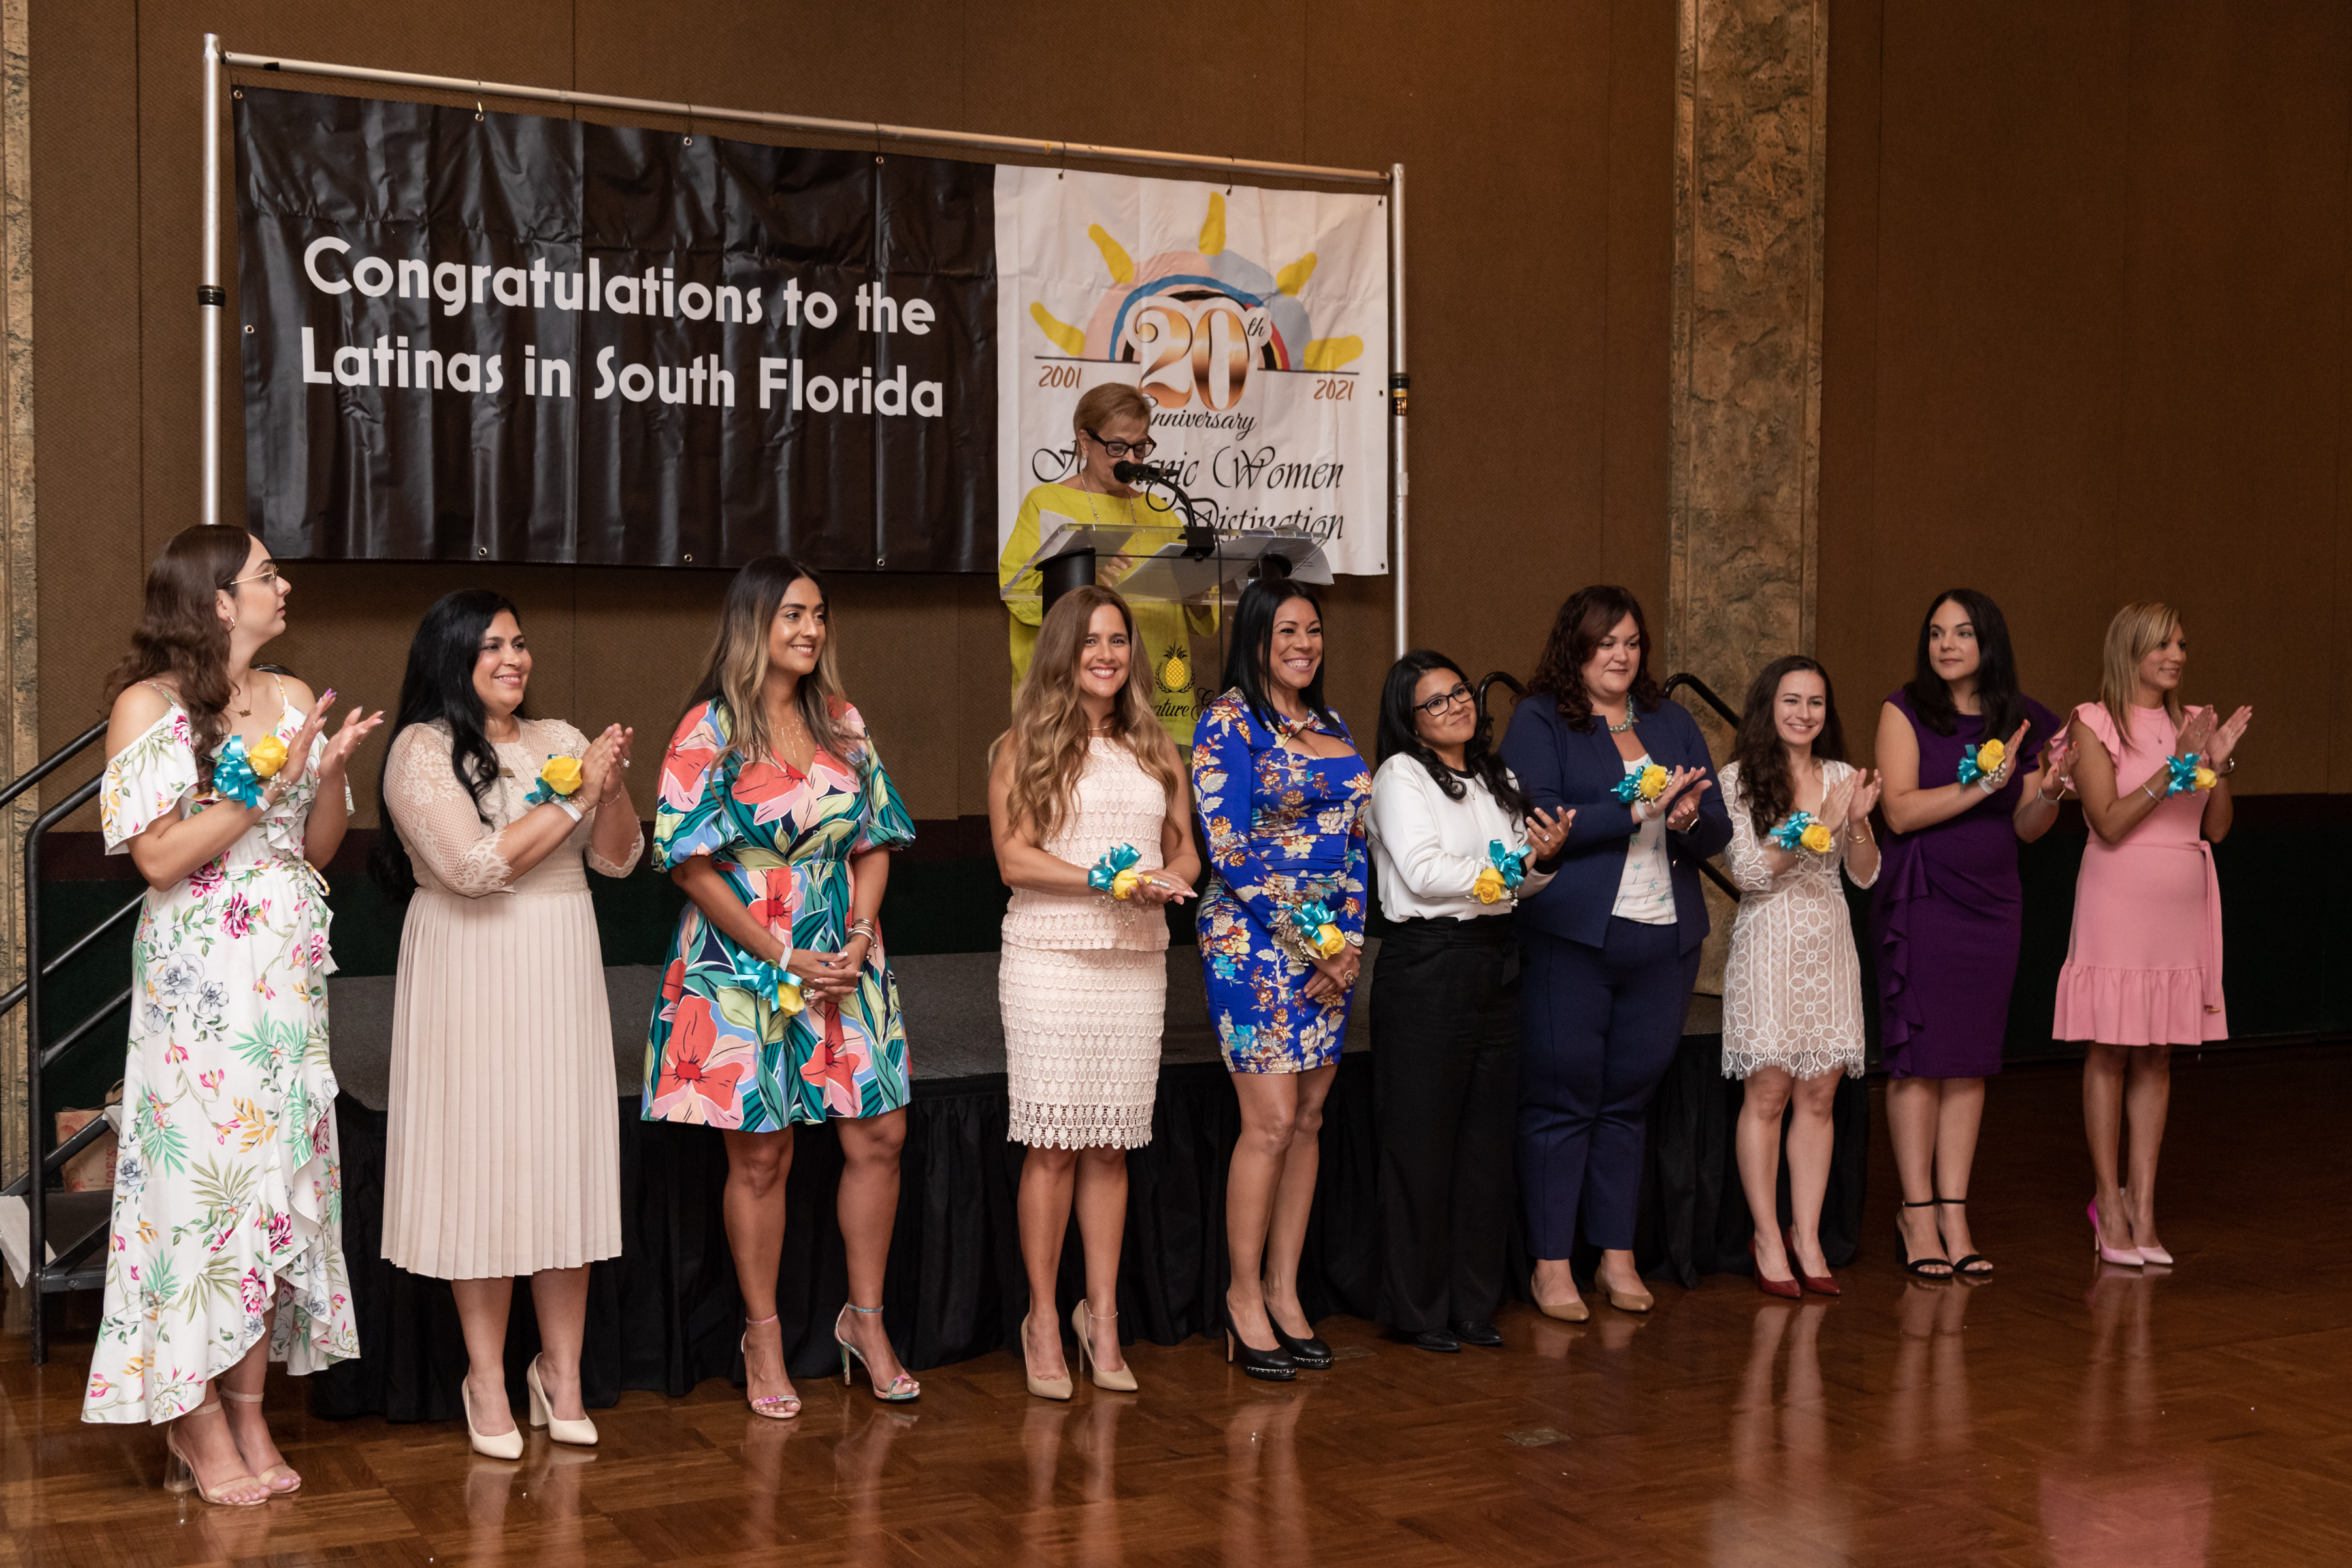 Dean Luna (fourth from left) with her fellow 2022 Hispanic Women of Distinction Honorees